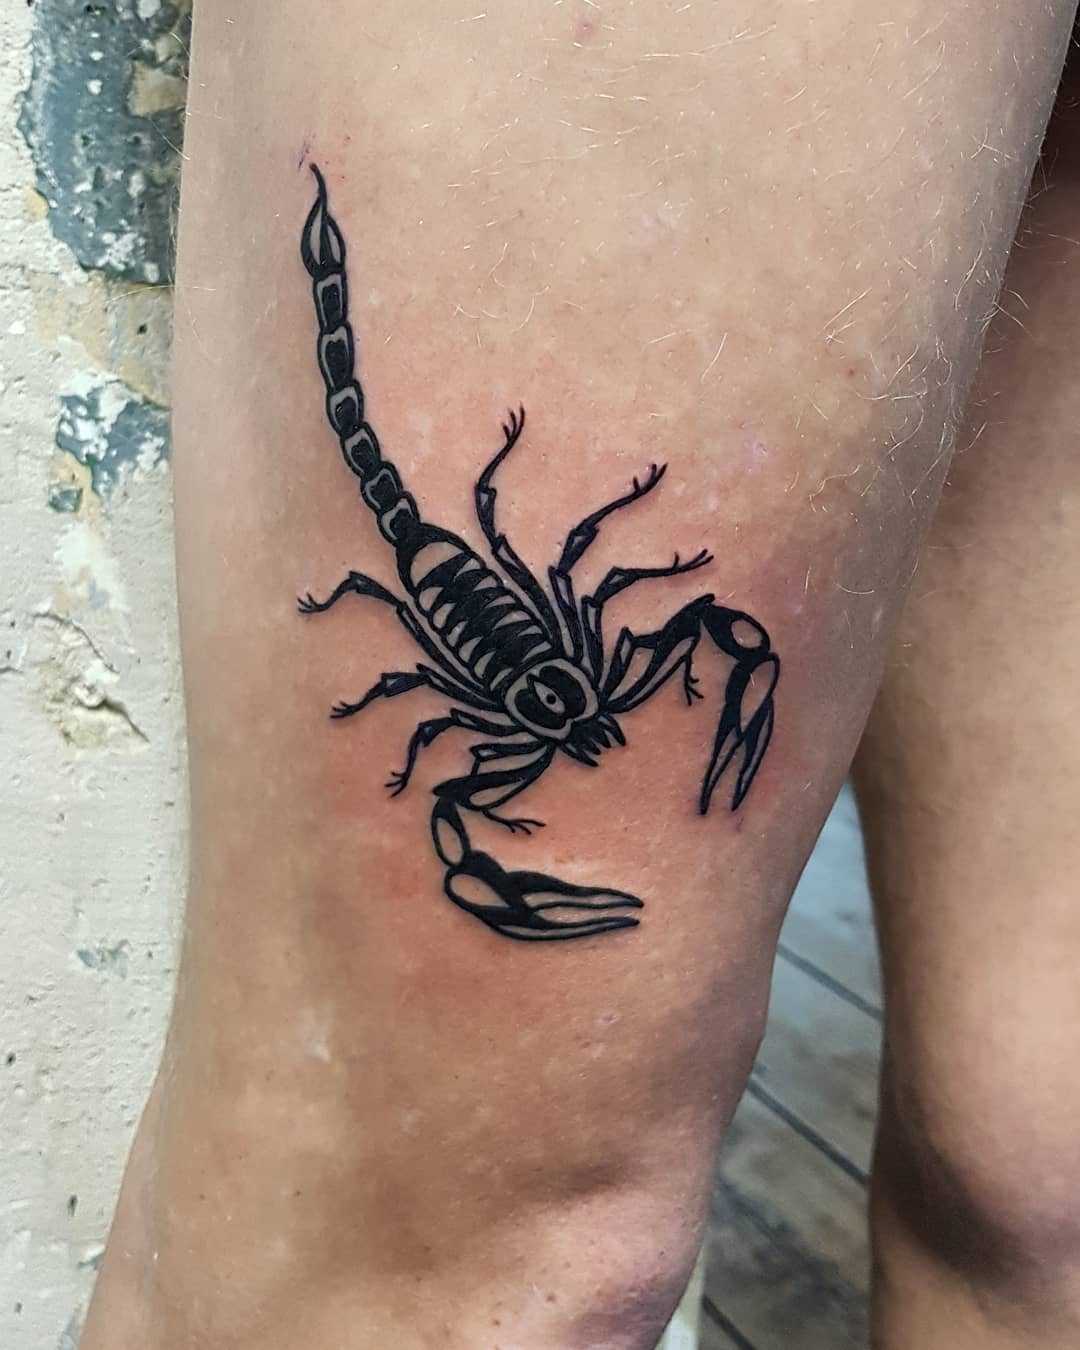 Scorpion tattoo on the right thigh